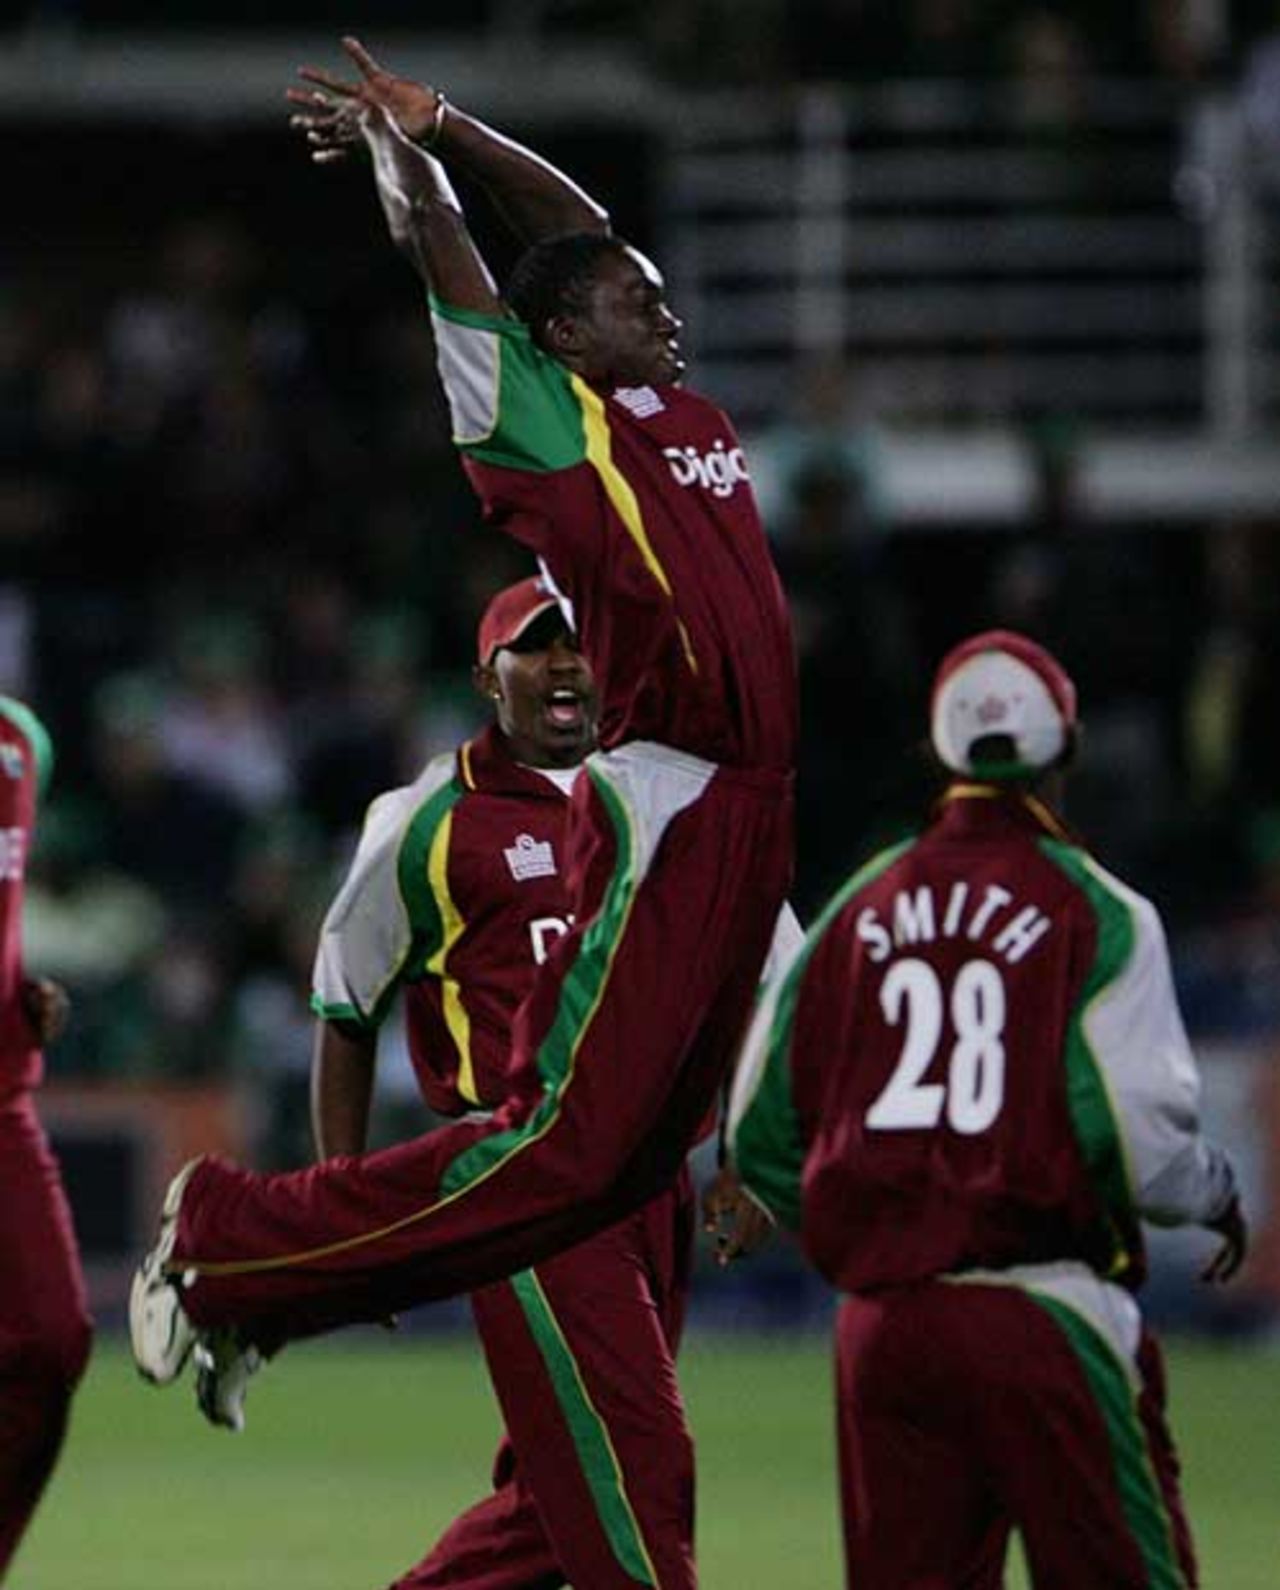 Jerome Taylor celebrates one of his three quick wickets, South Africa v West Indies, 1st Twenty20, Port Elizabeth, December 16, 2007